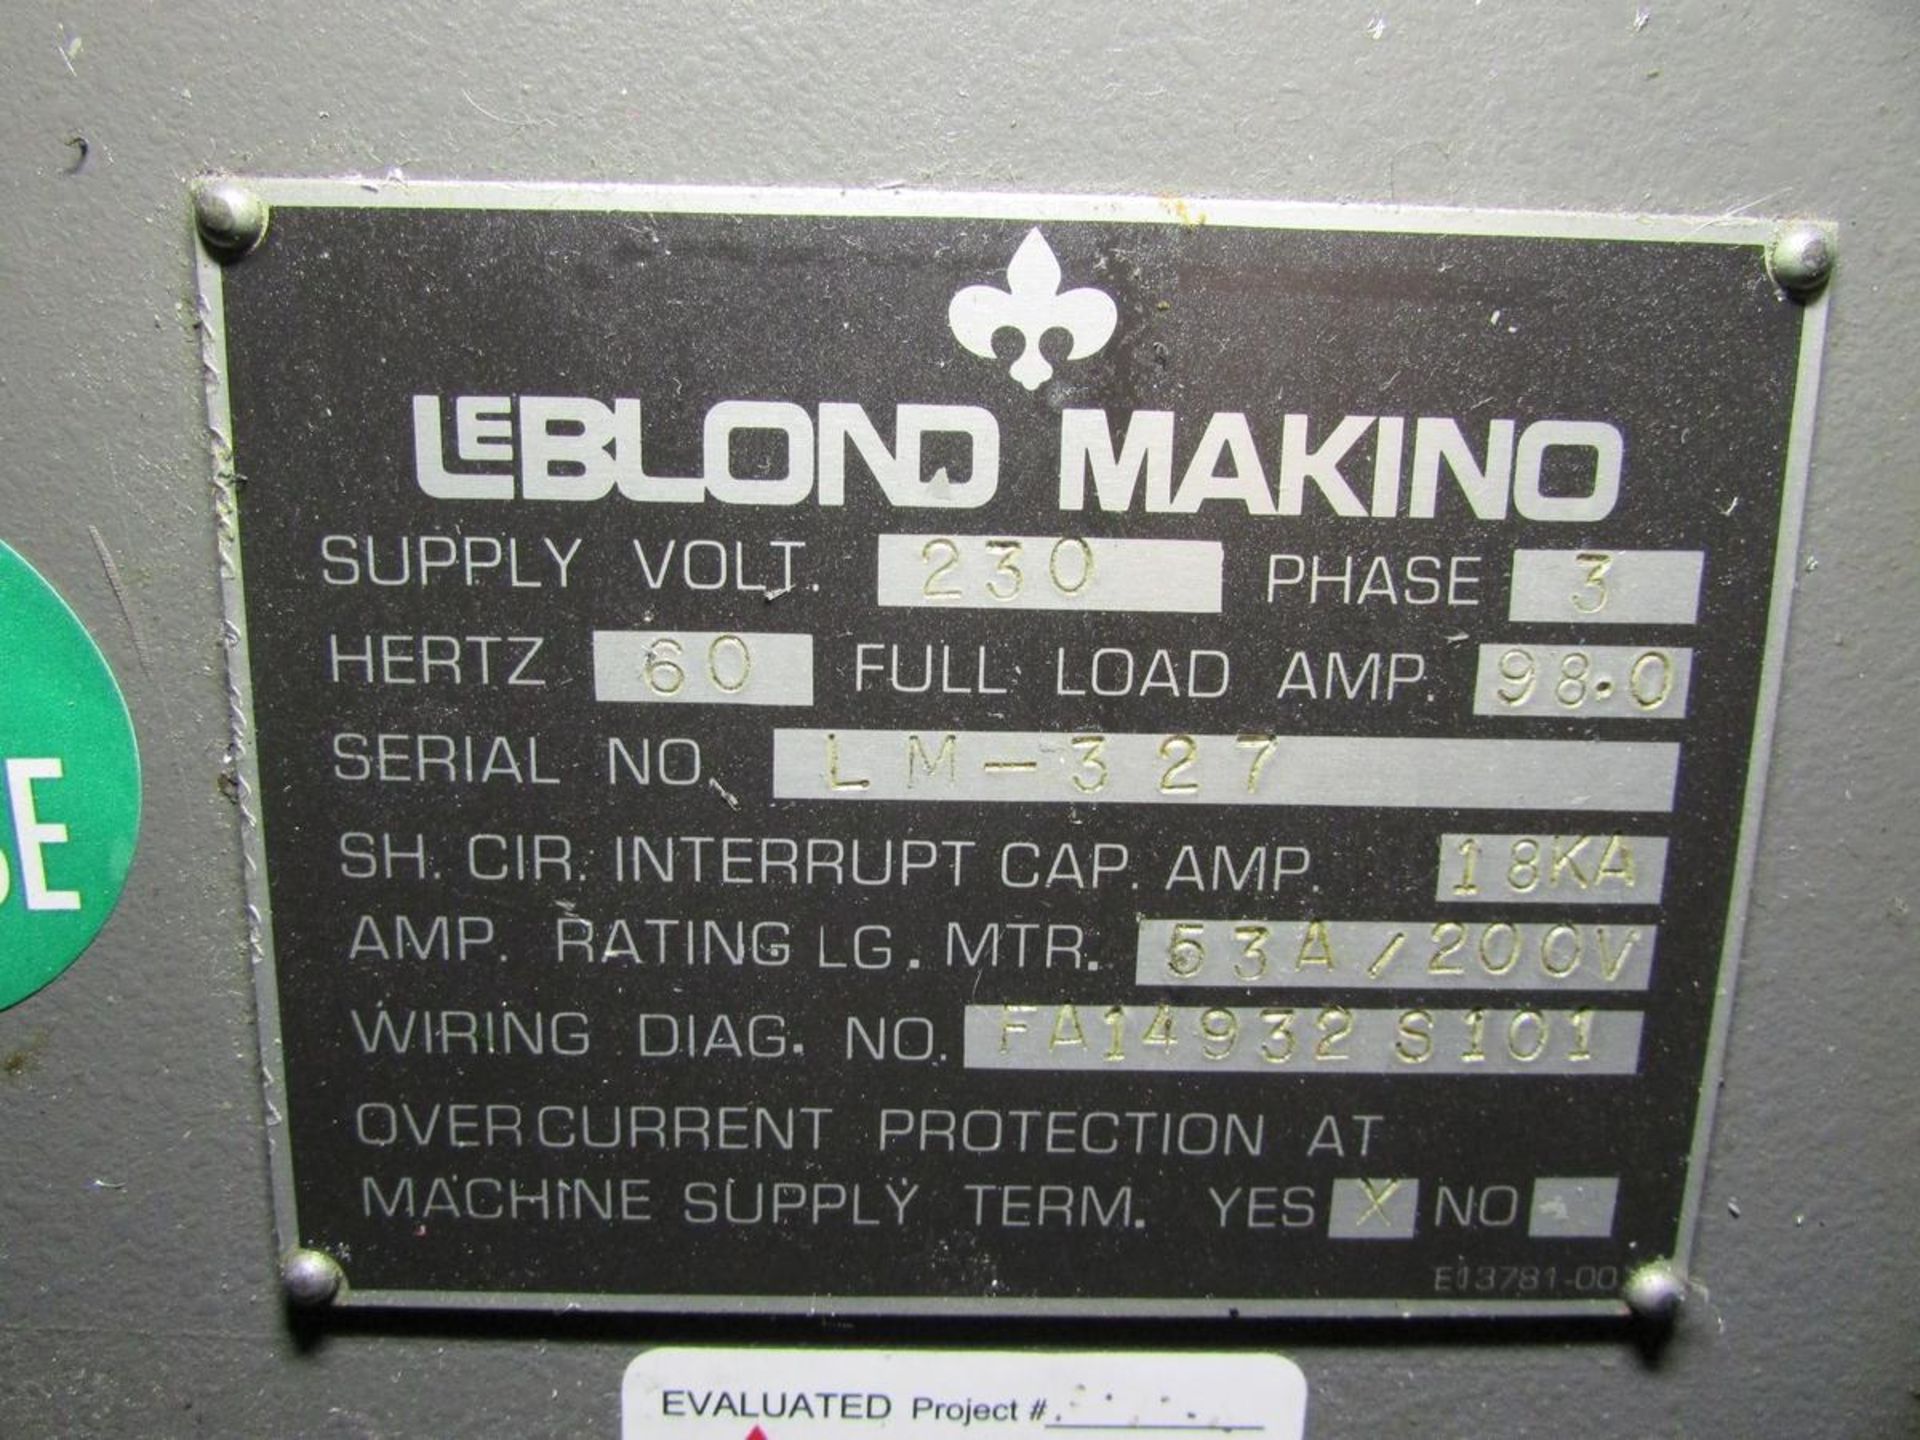 LeBlond Makino FNC106-A30 3-Axis CNC Vertical Maching Center - Image 25 of 25